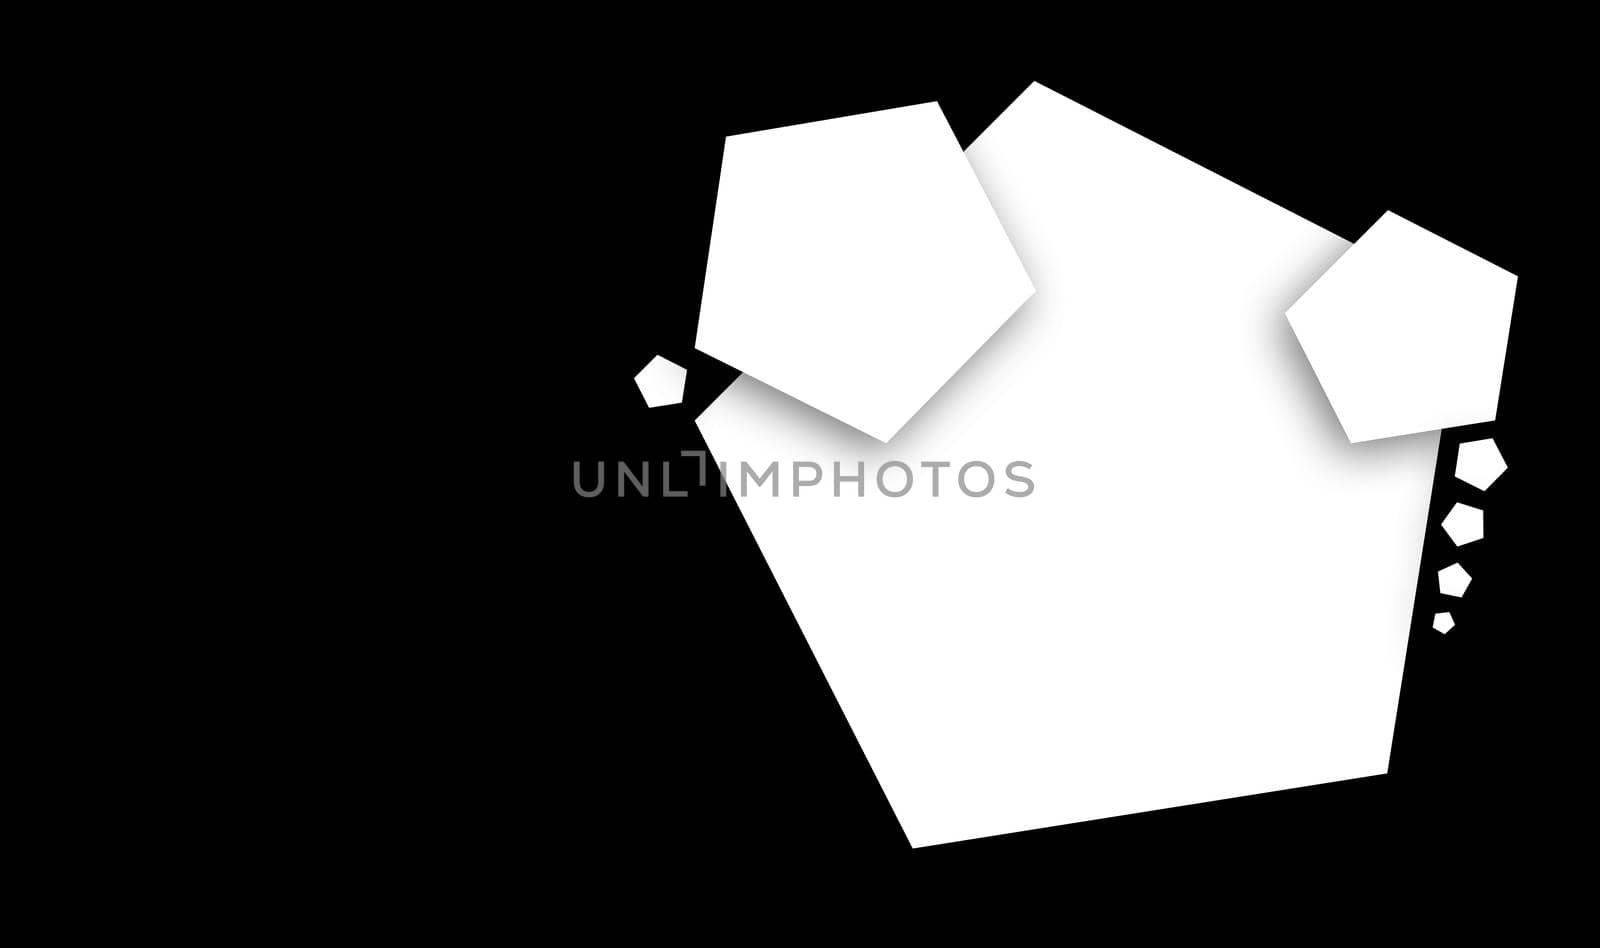 pentagon design creating a design by overlapping on each other in black isolated background with soft shadow, layered image ready to print for cards, invitation, design print